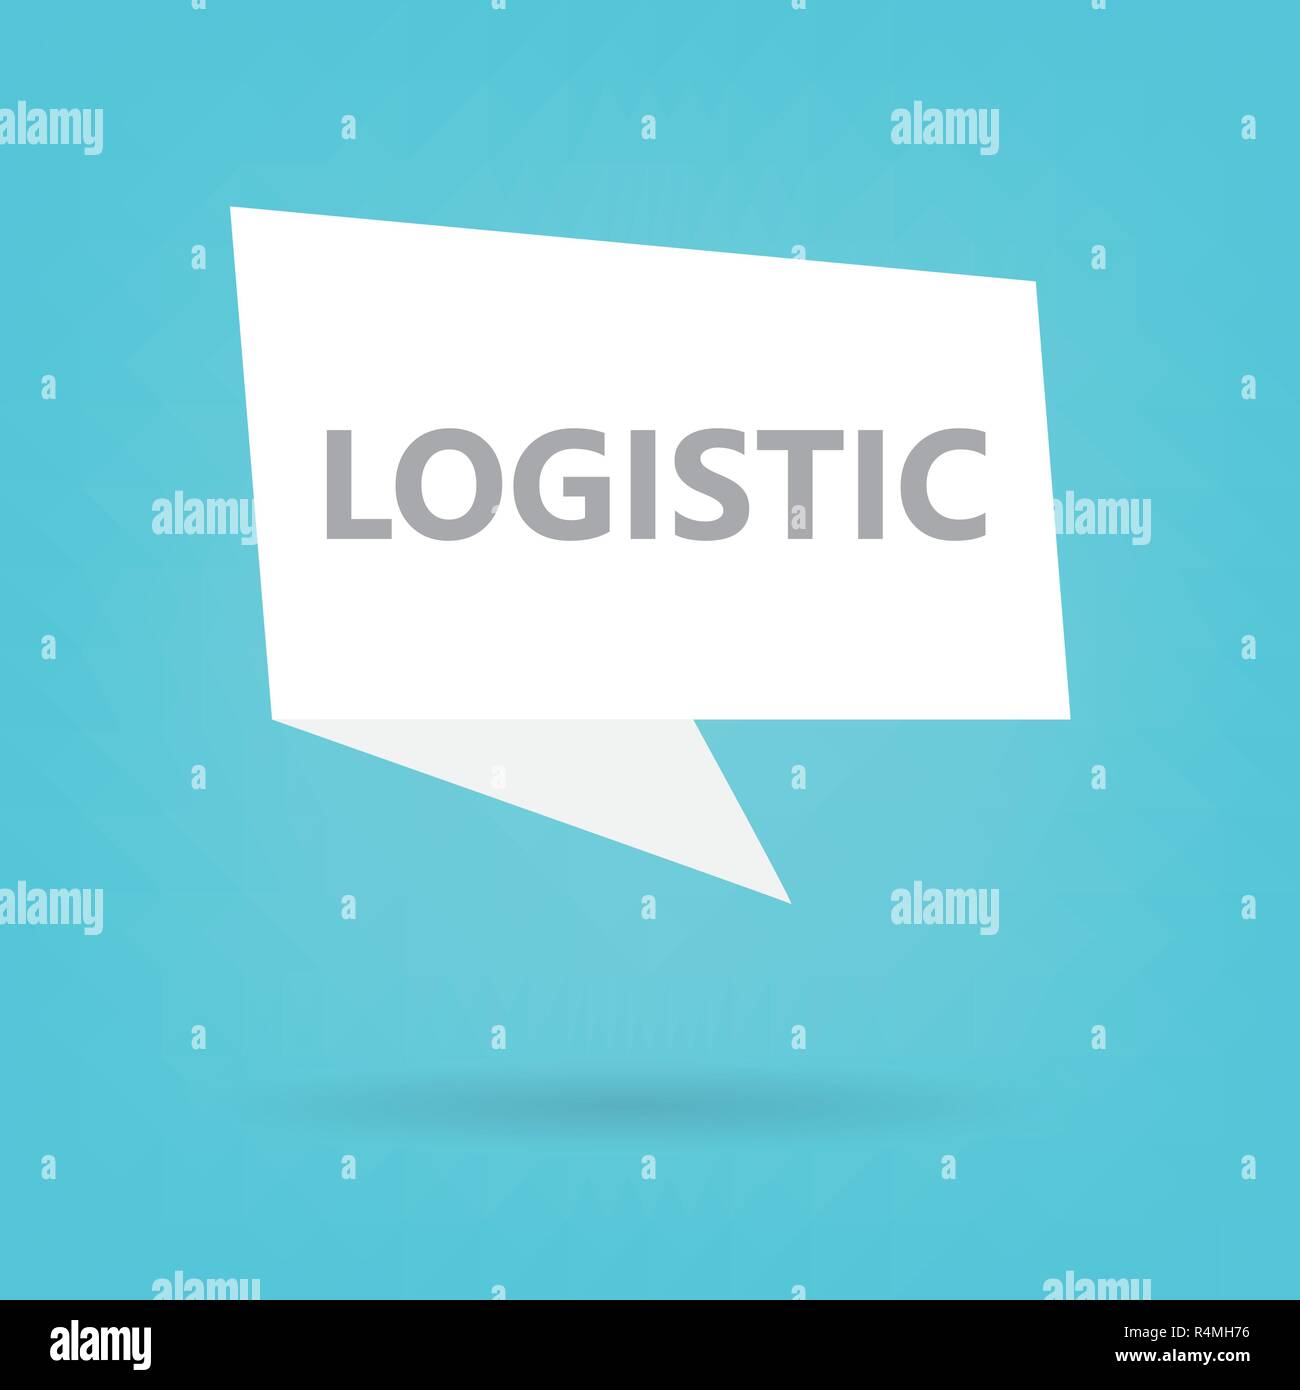 logistic word on a speech bubble- vector illustration Stock Vector